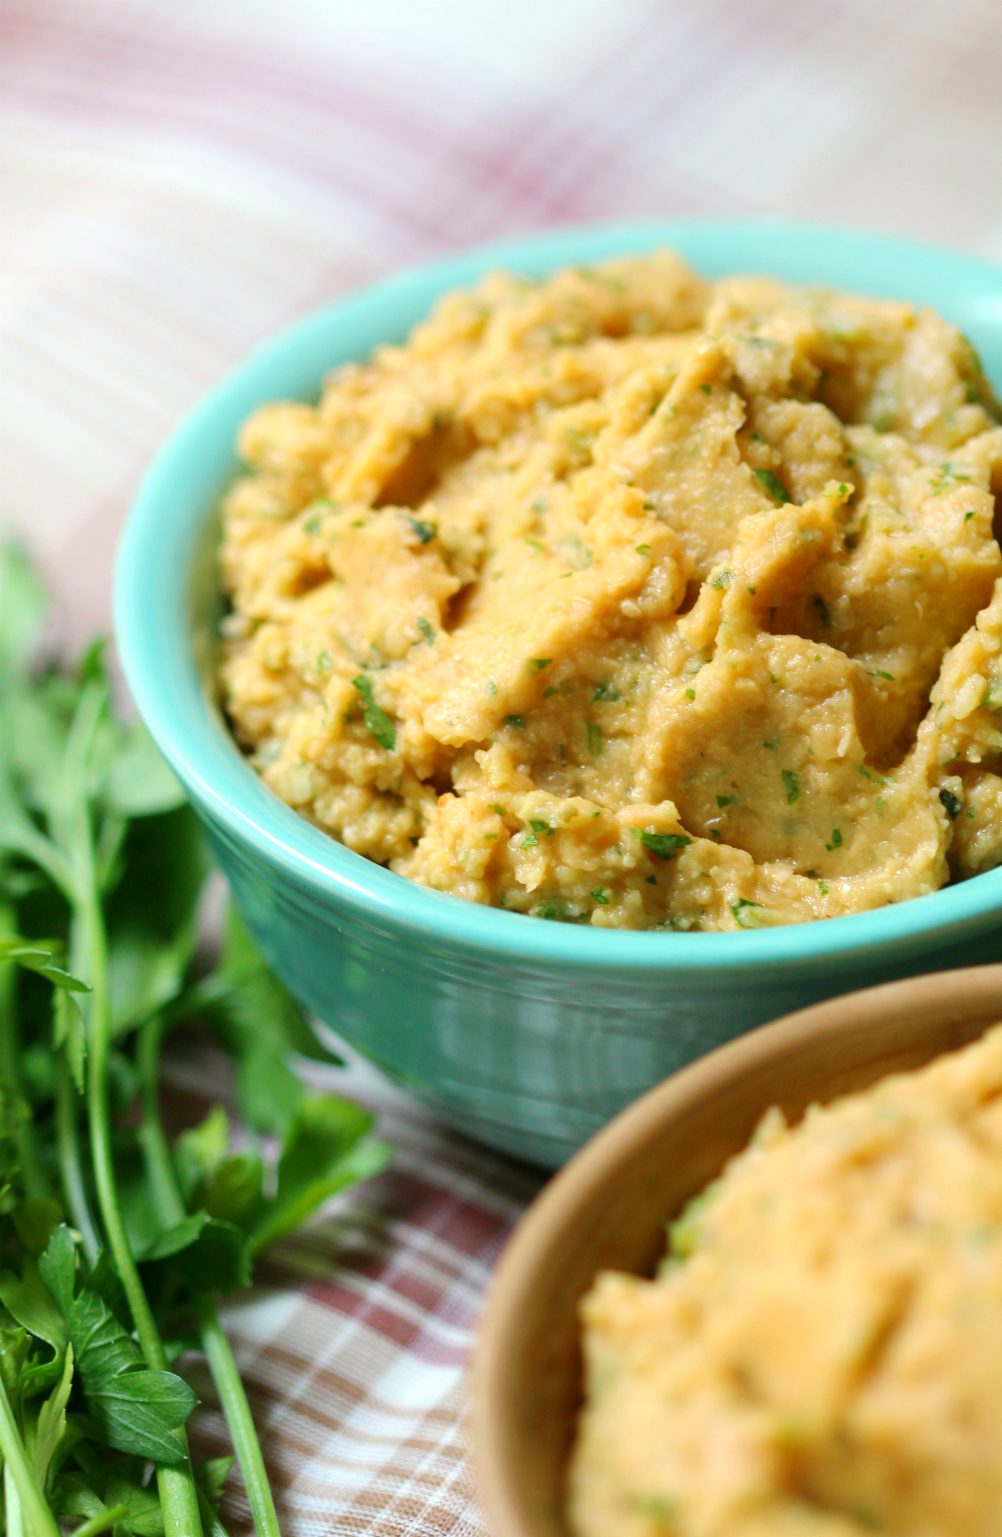 Spicy Garden Carrot Hummus | Strength and Sunshine @RebeccaGF666 A zesty dip or spread to pack in the veggies! Spicy garden carrot hummus is gluten-free & vegan without the oil. A healthy seasonal take to use your garden's fresh carrots and herbs in a crowd-pleasing favorite recipe!